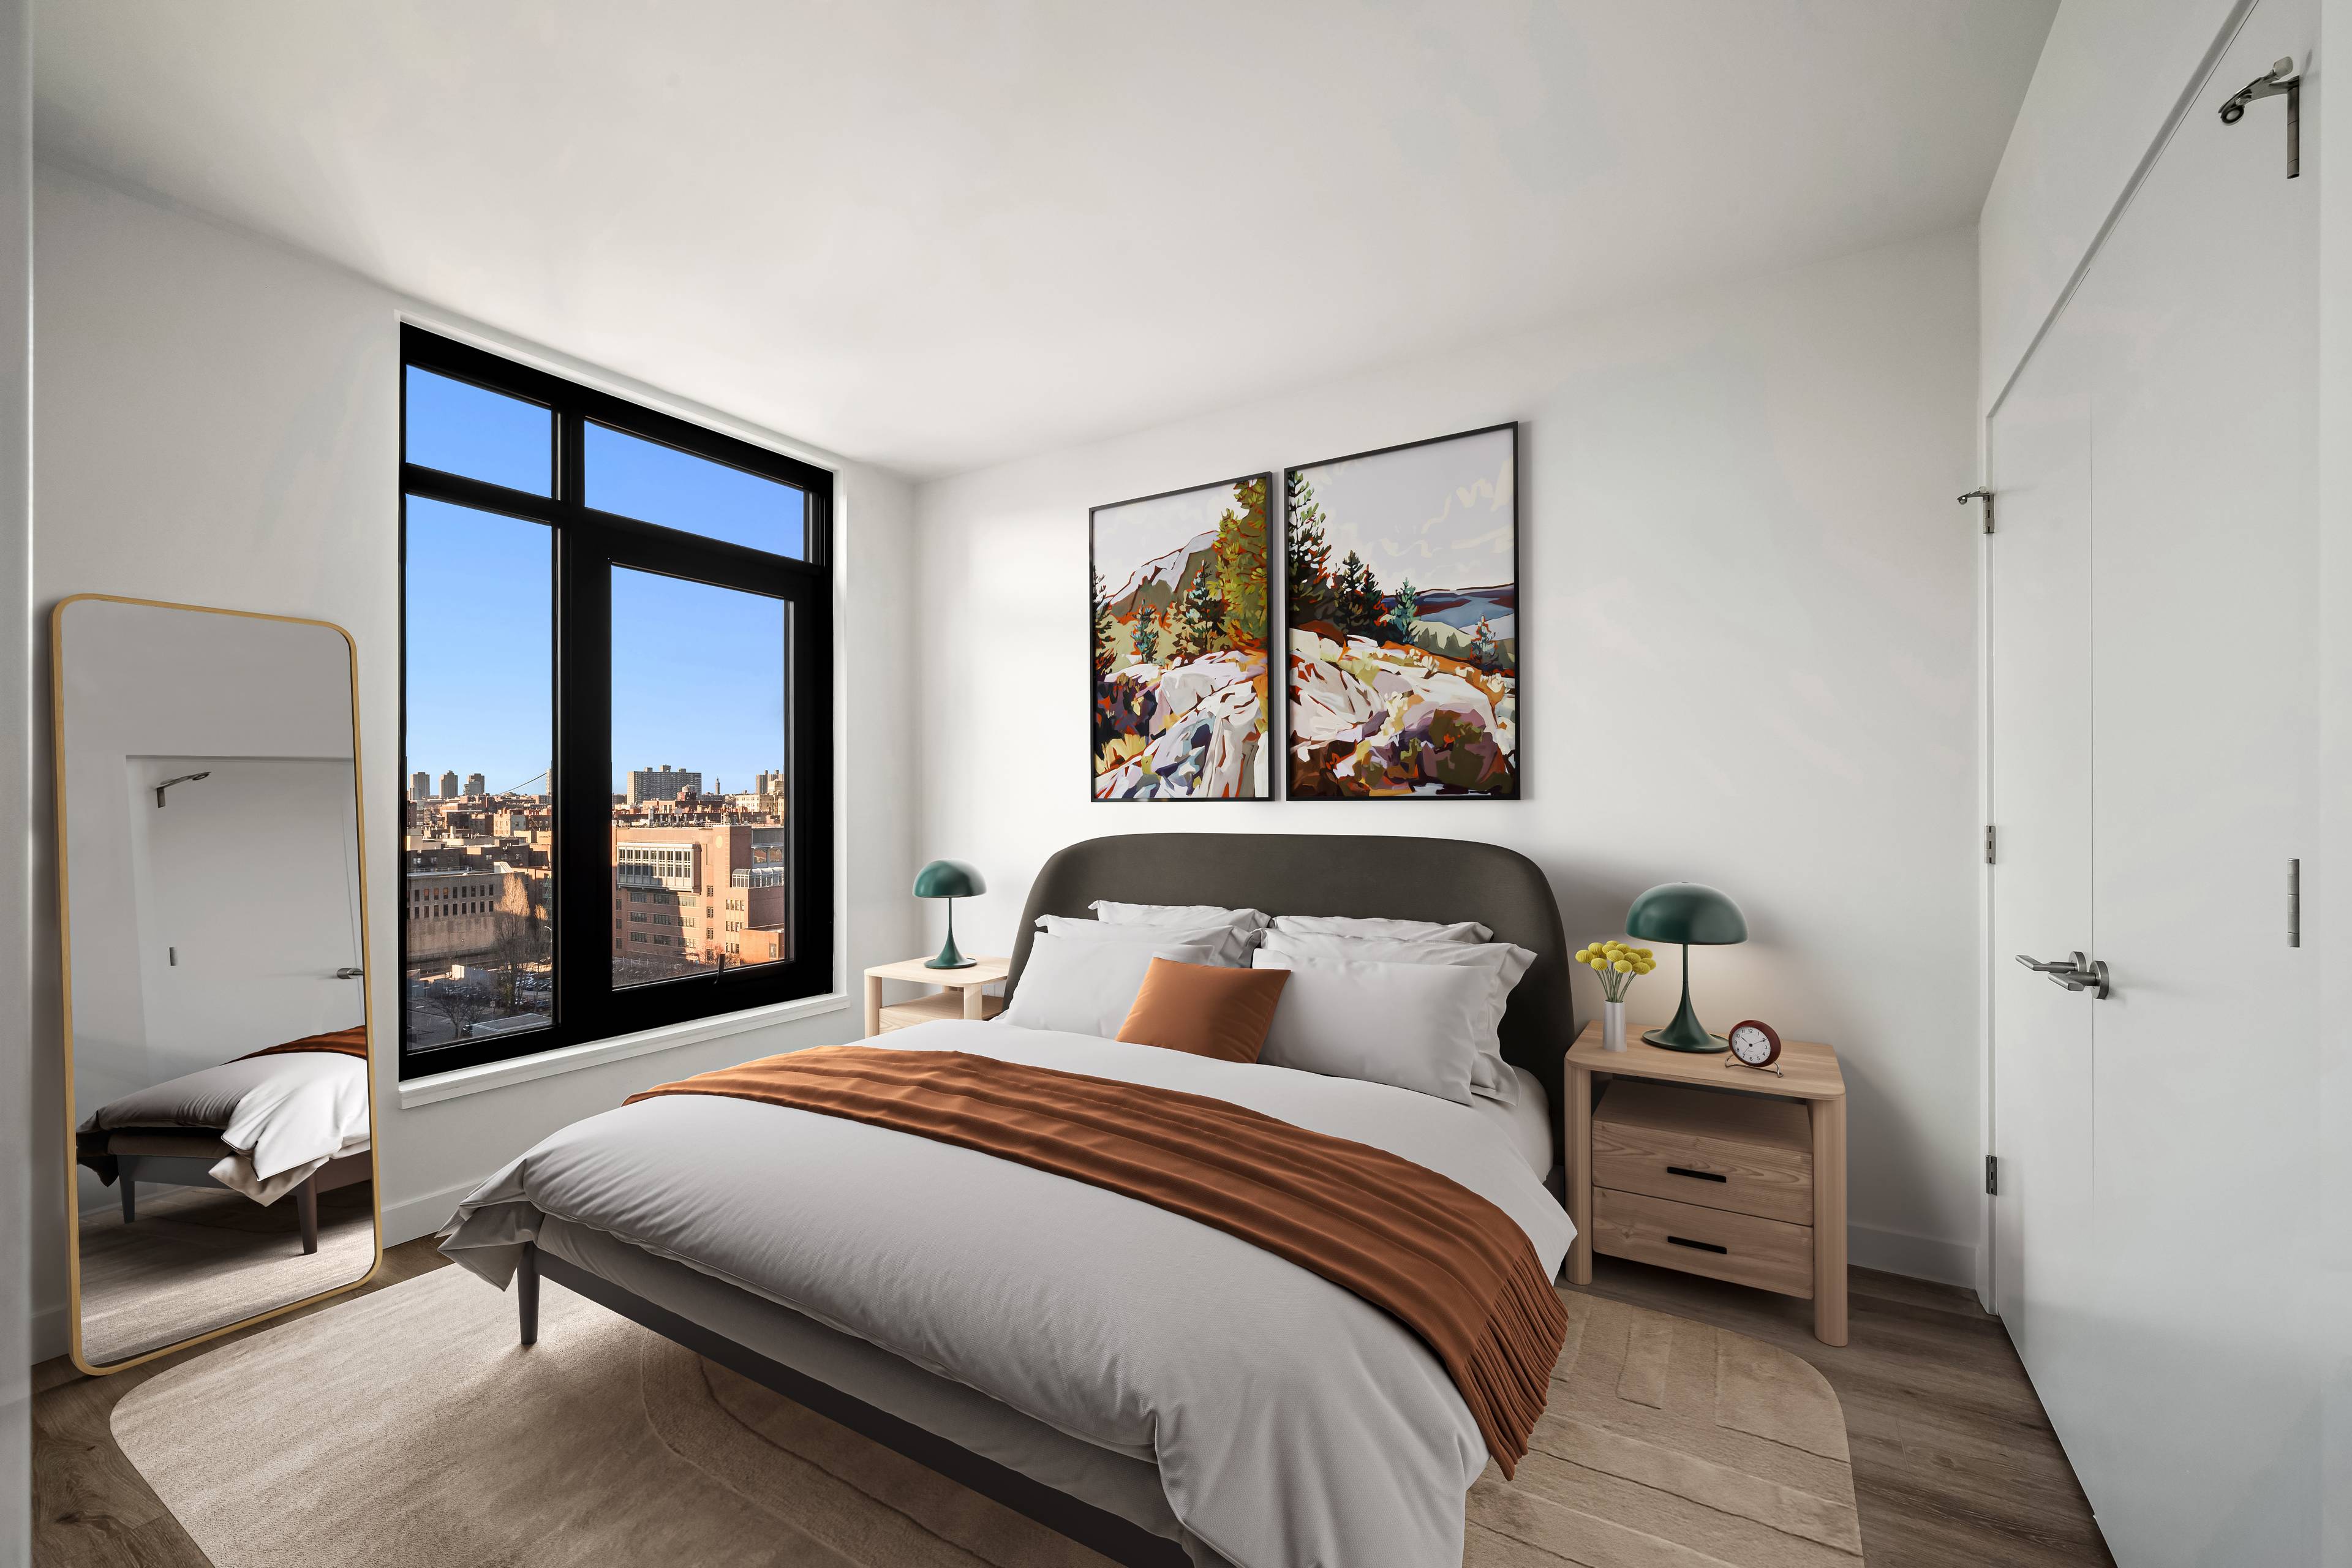 761 square feet 2 bedroom 2 bathroom Introducing The Bronx Vibe, a brand new rental development in Concourse Village that's not just a bunch of walls, it's a lifestyle statement.